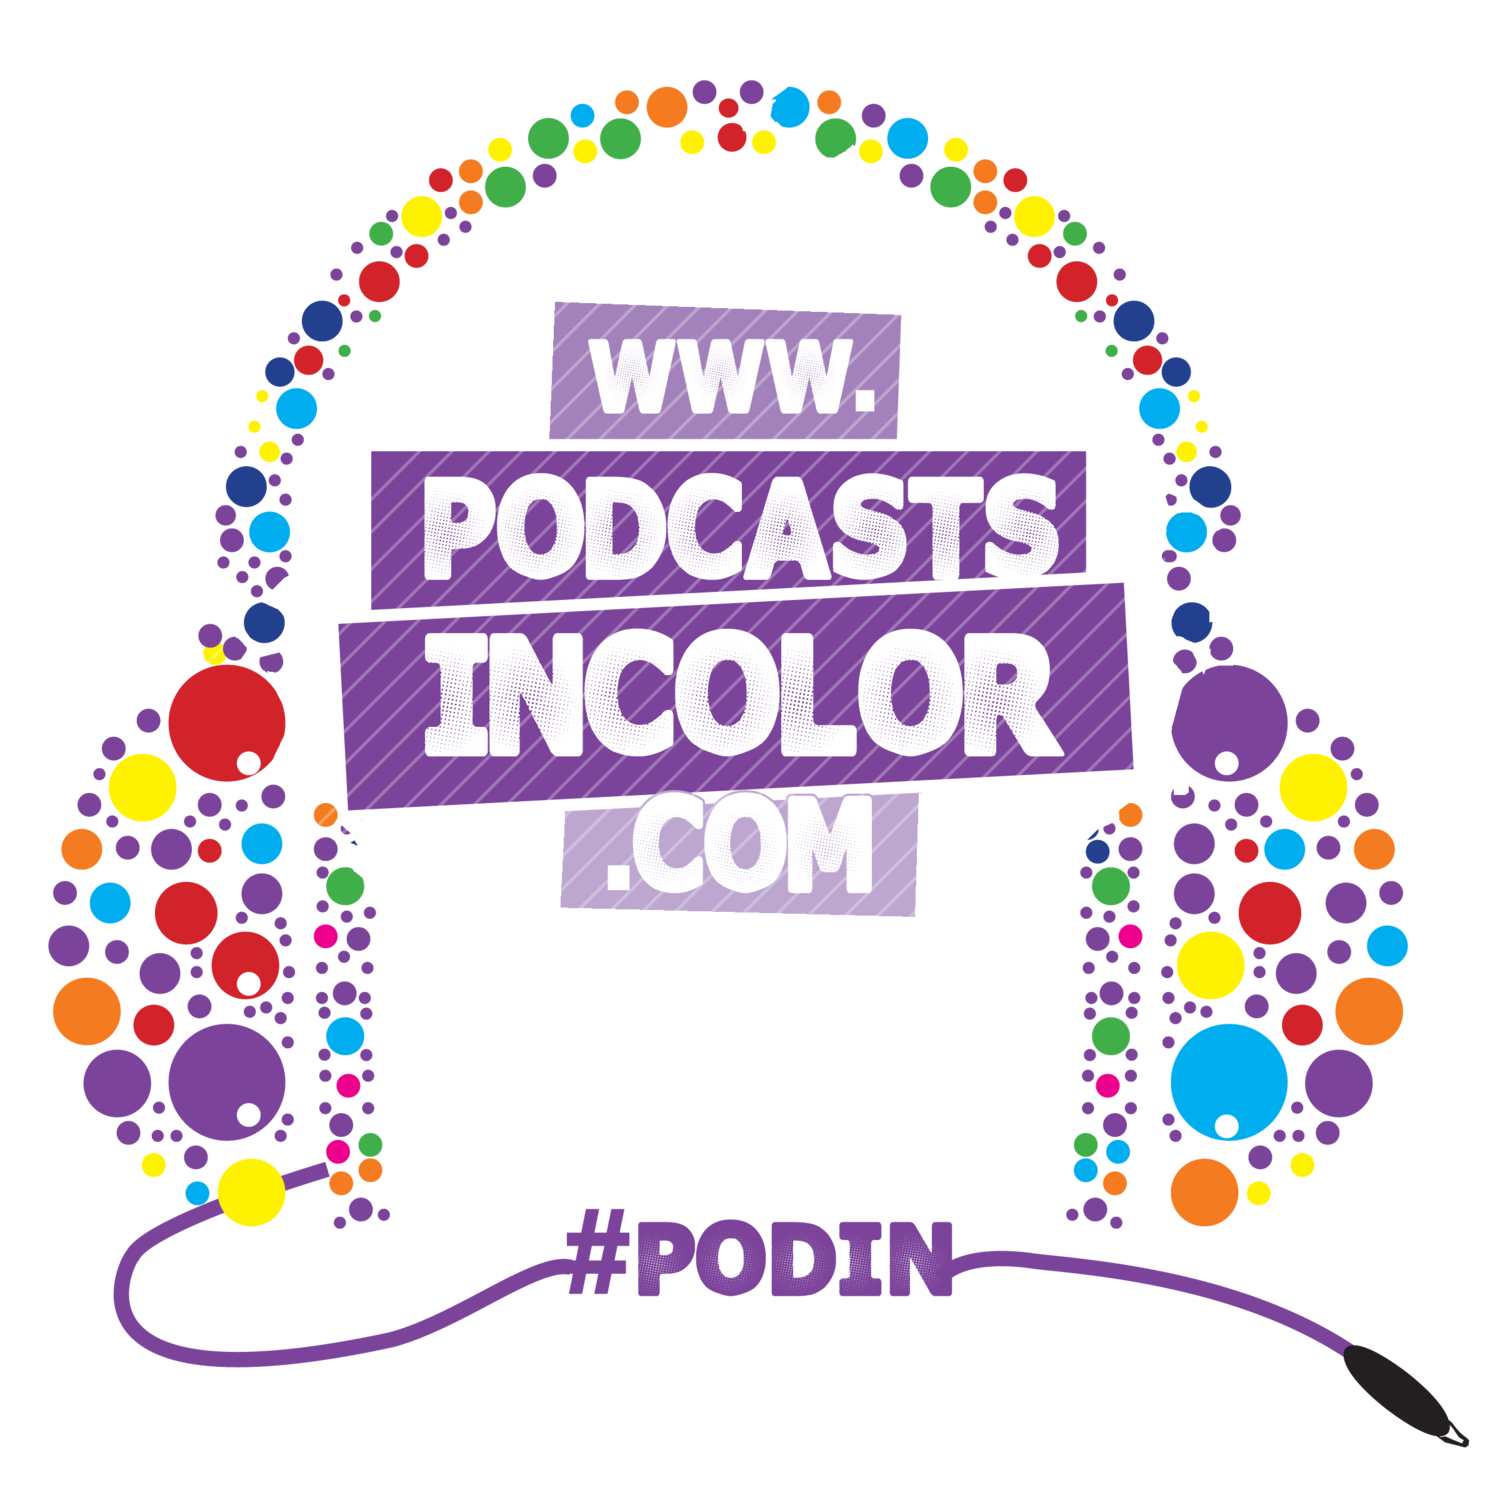 Podcasts In Color listening community